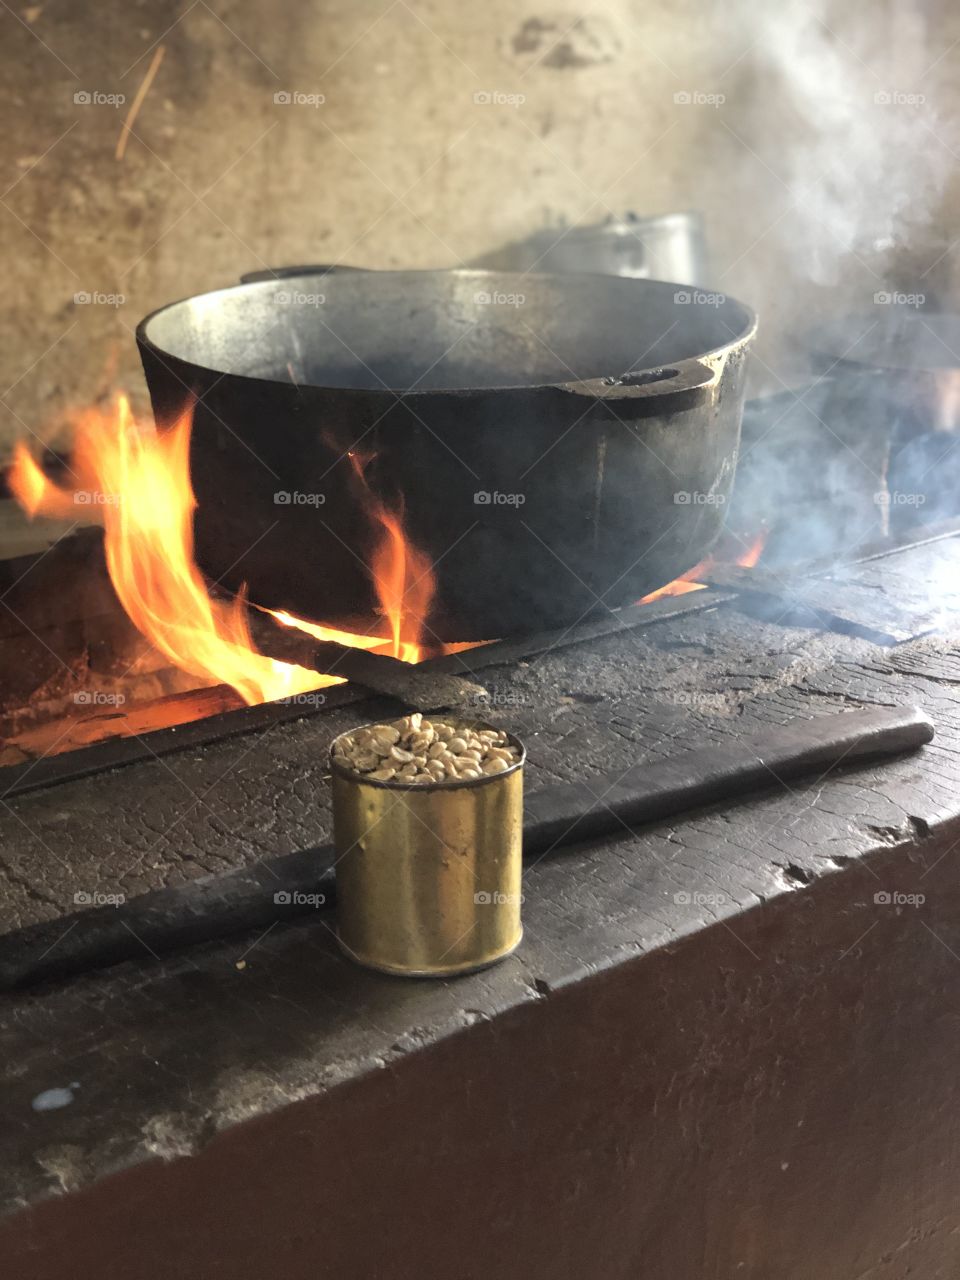 Getting ready to roast our very own batch of coffee beans at a traditional coffee farm in the mountains outside of Trinidad, Cuba!